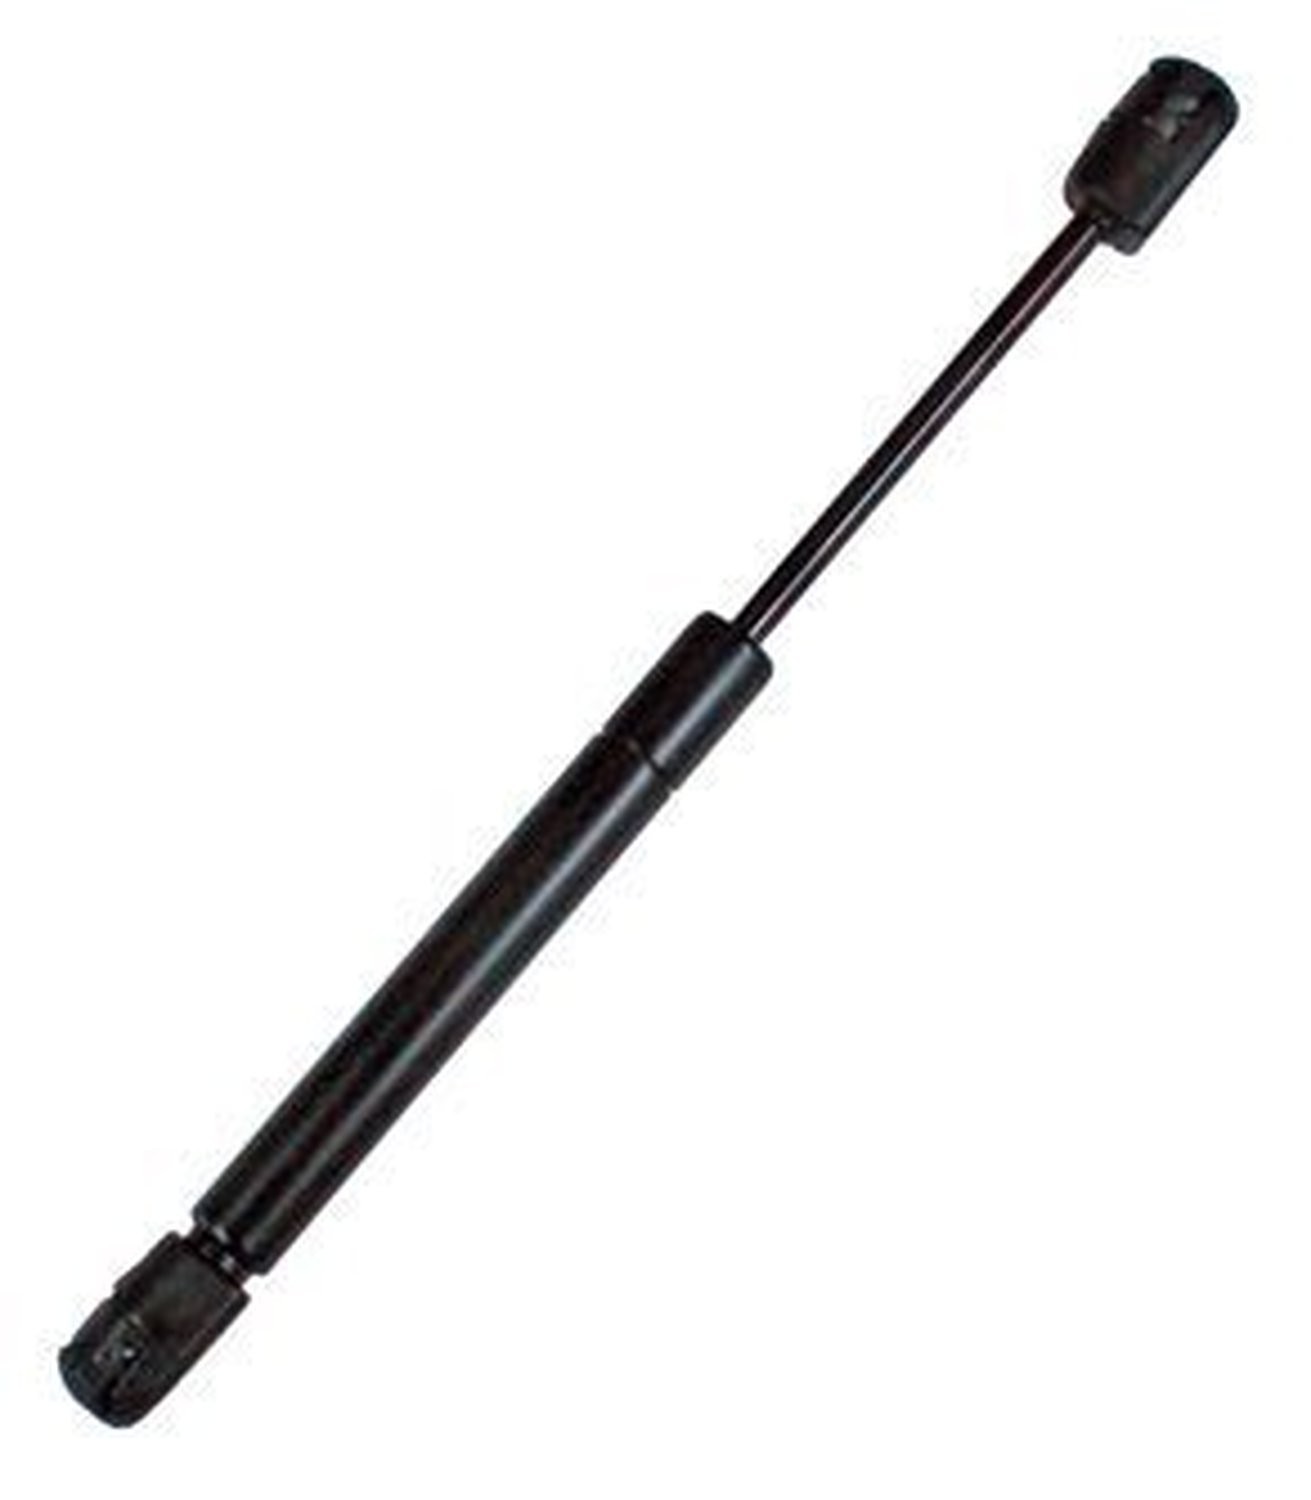 Peugeot 308 ( Onwards Model) Lifter Gas Struts With OEM Fittings - In Black Carbon Steel With Nitrocarburized Plating